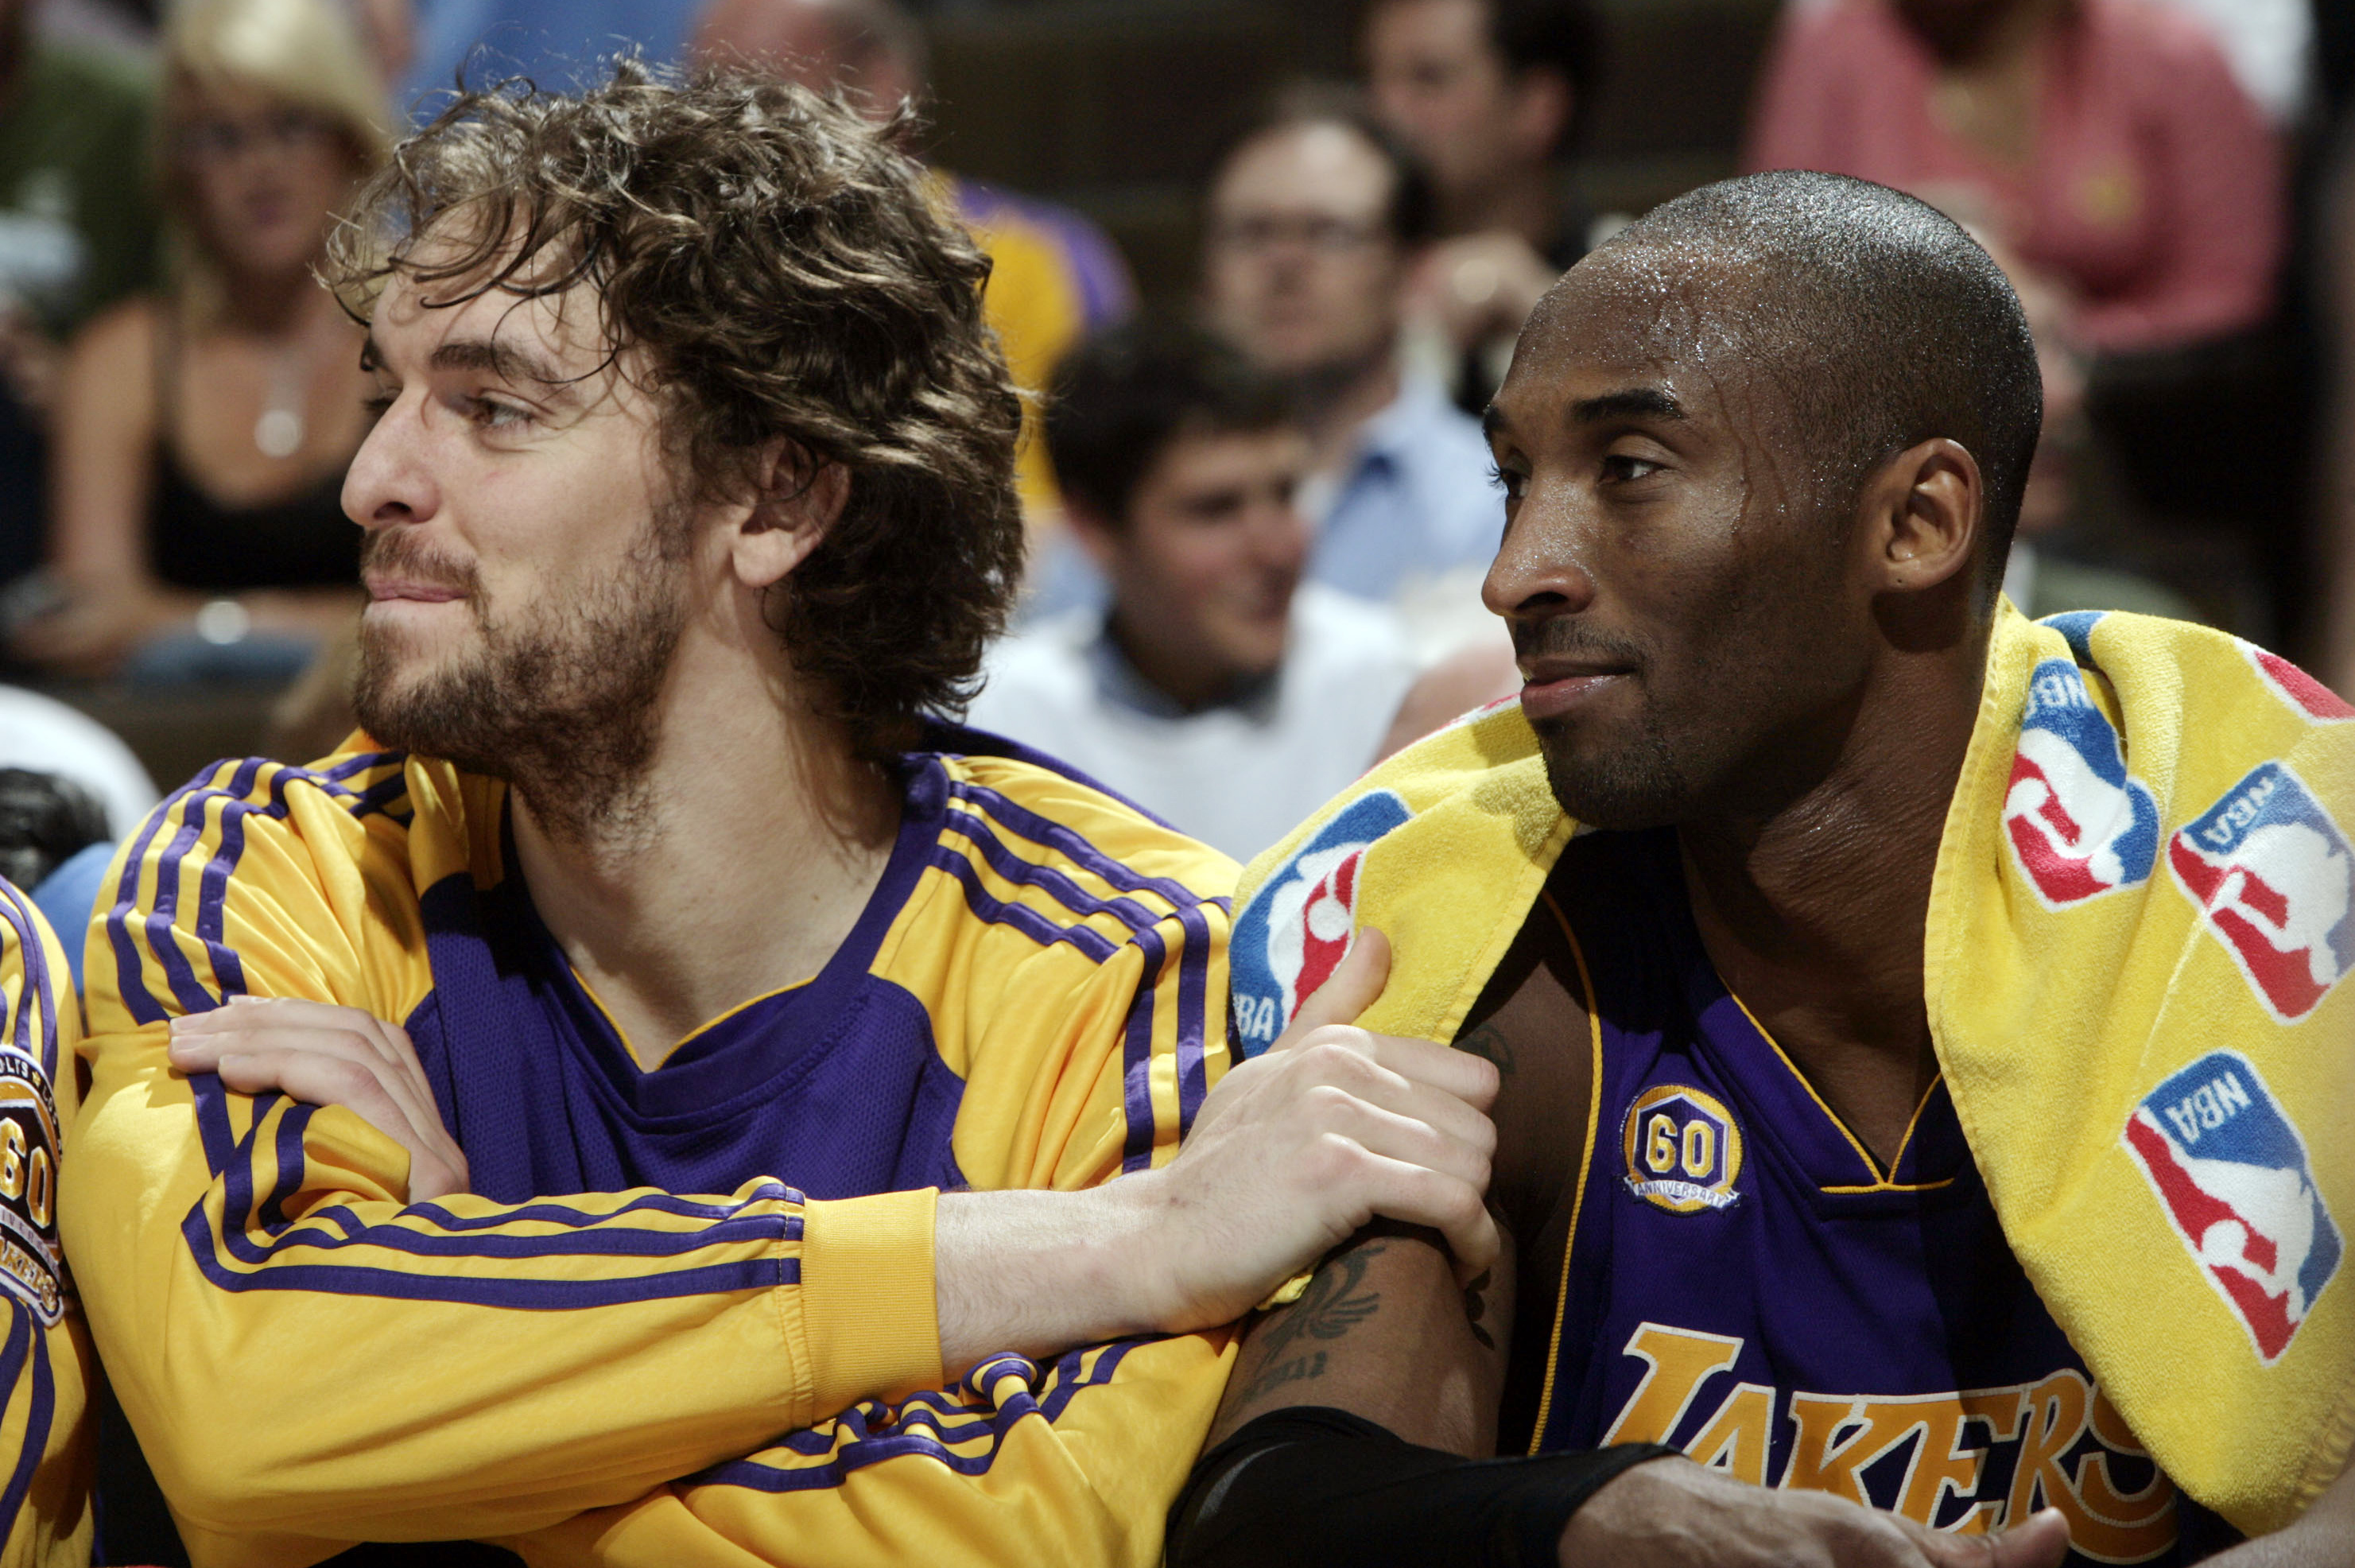 Chicago's Pau Gasol to square off against Lakers with mixed emotions –  Daily News